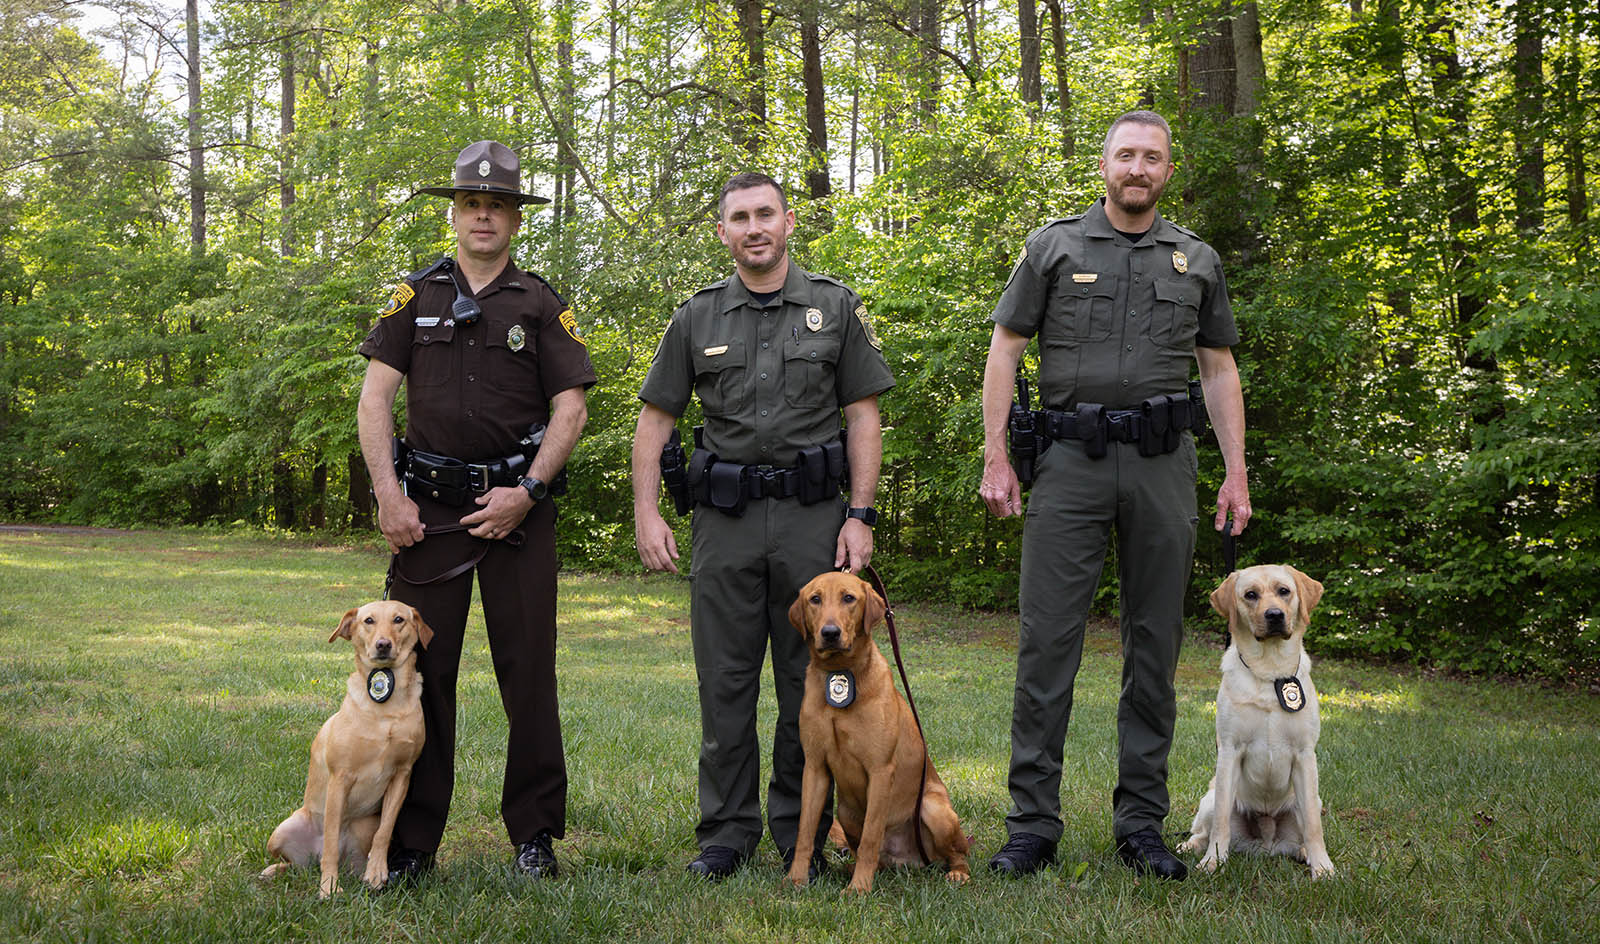 A photo of three law enforcement officers in uniform standing in a line, with three Labrador retriever dogs at their feet wearing badges.